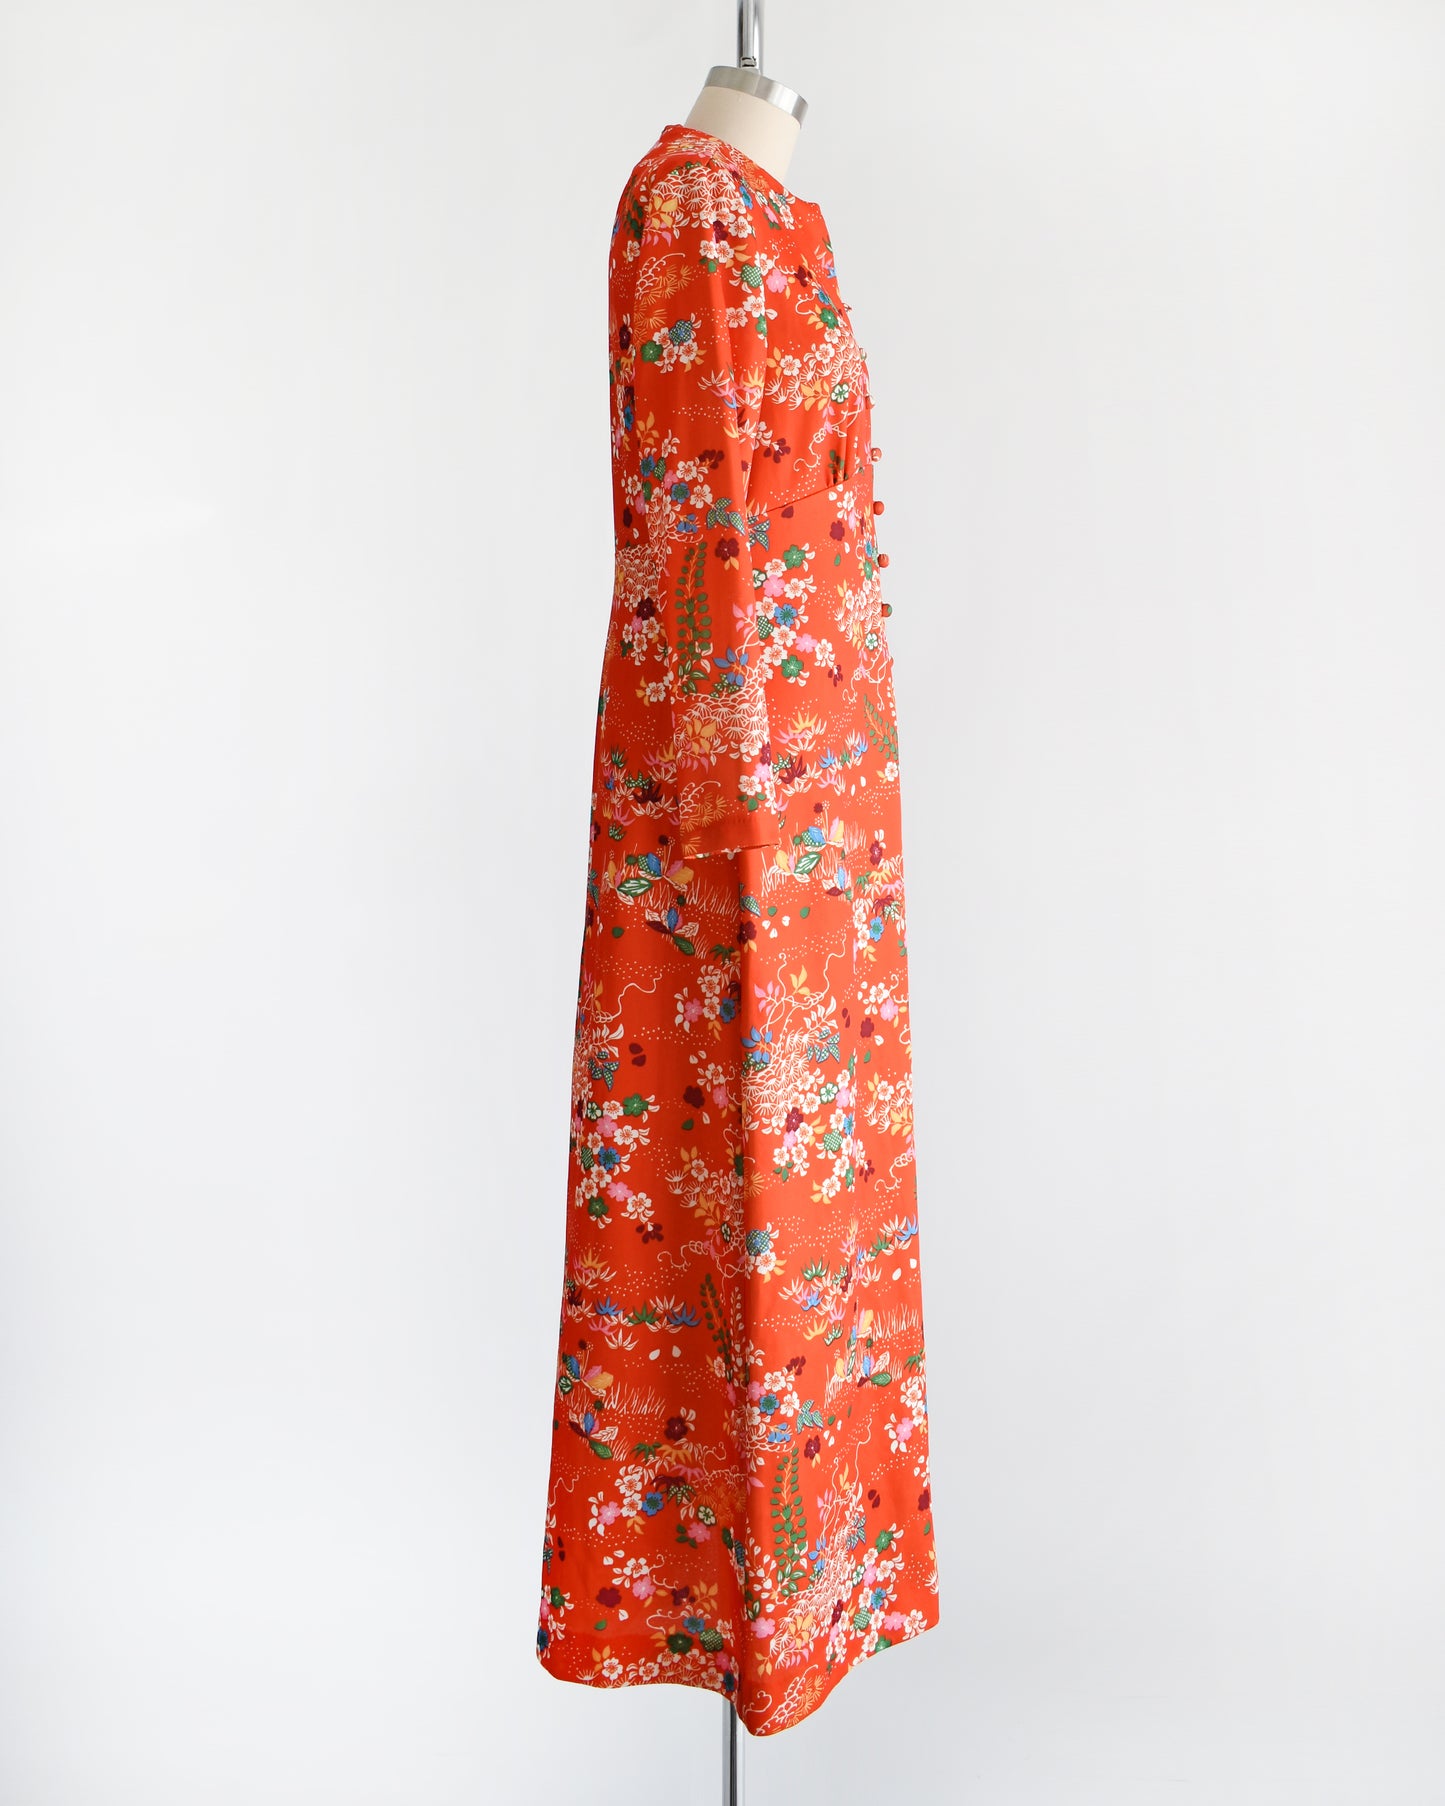 Side view of a vintage 1970s maxi dress features a vibrant red-orange hue, with a delightful floral and dotted print in homage to traditional Japanese flower designs. 